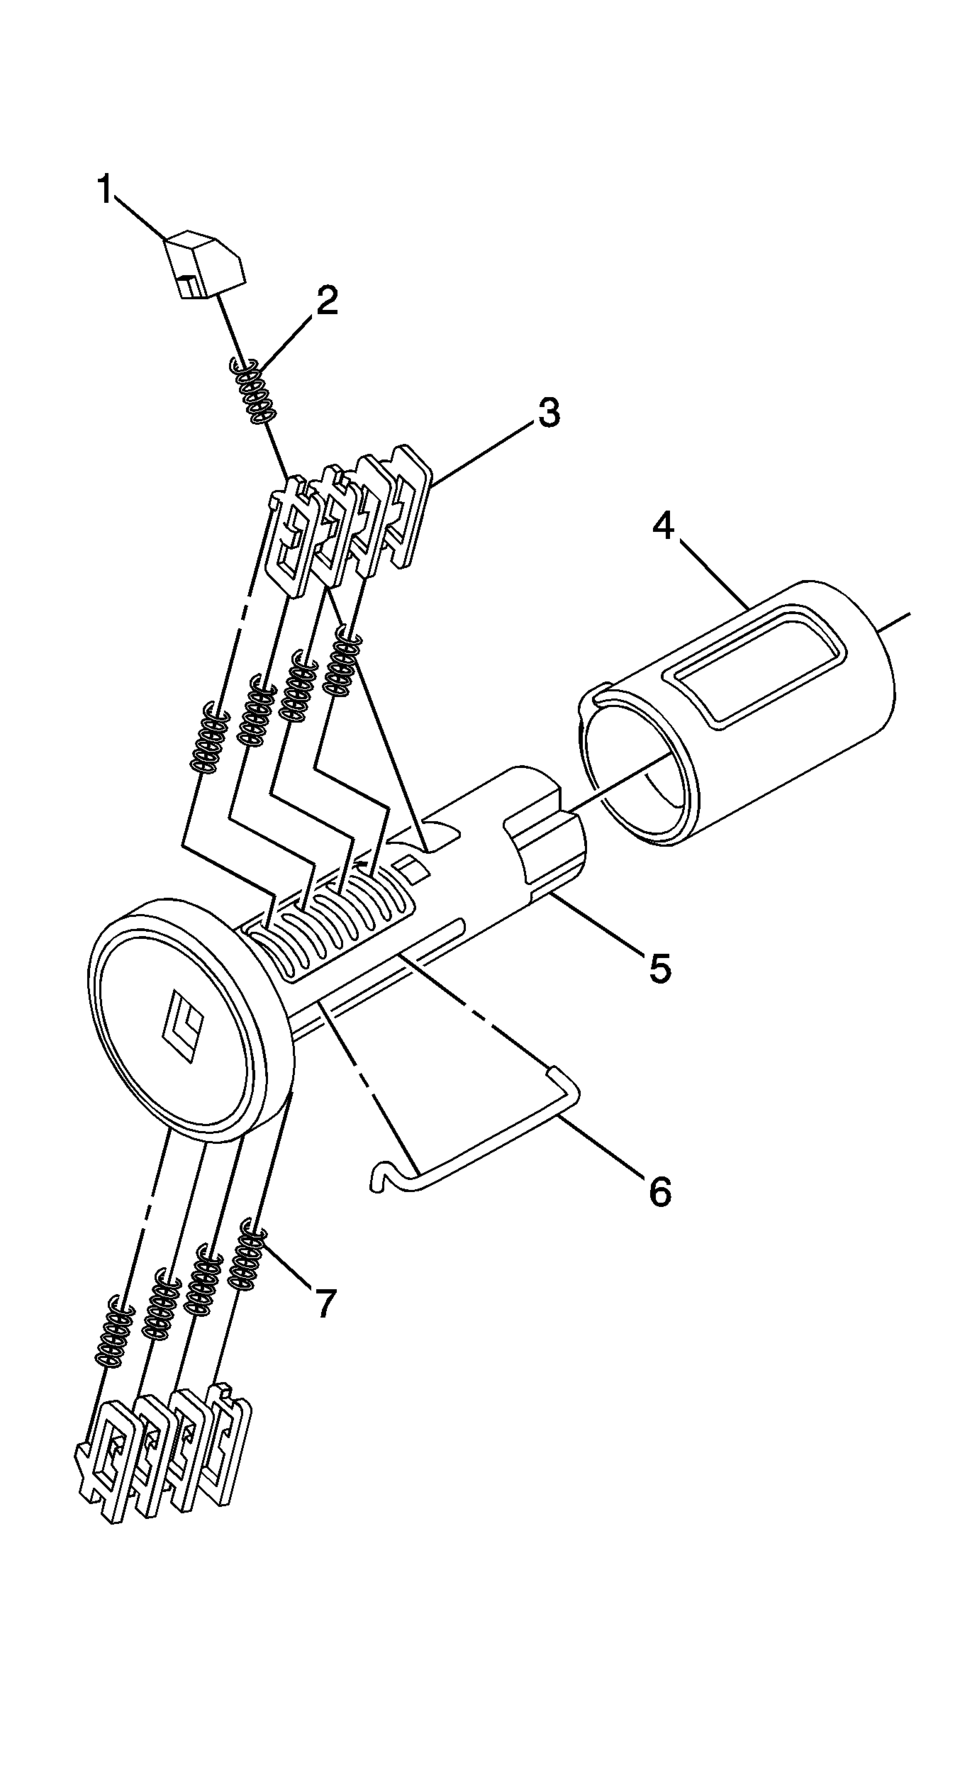 The ignition lock cylinder uses 8 key cut positions, 1?E. The ignition cylinder